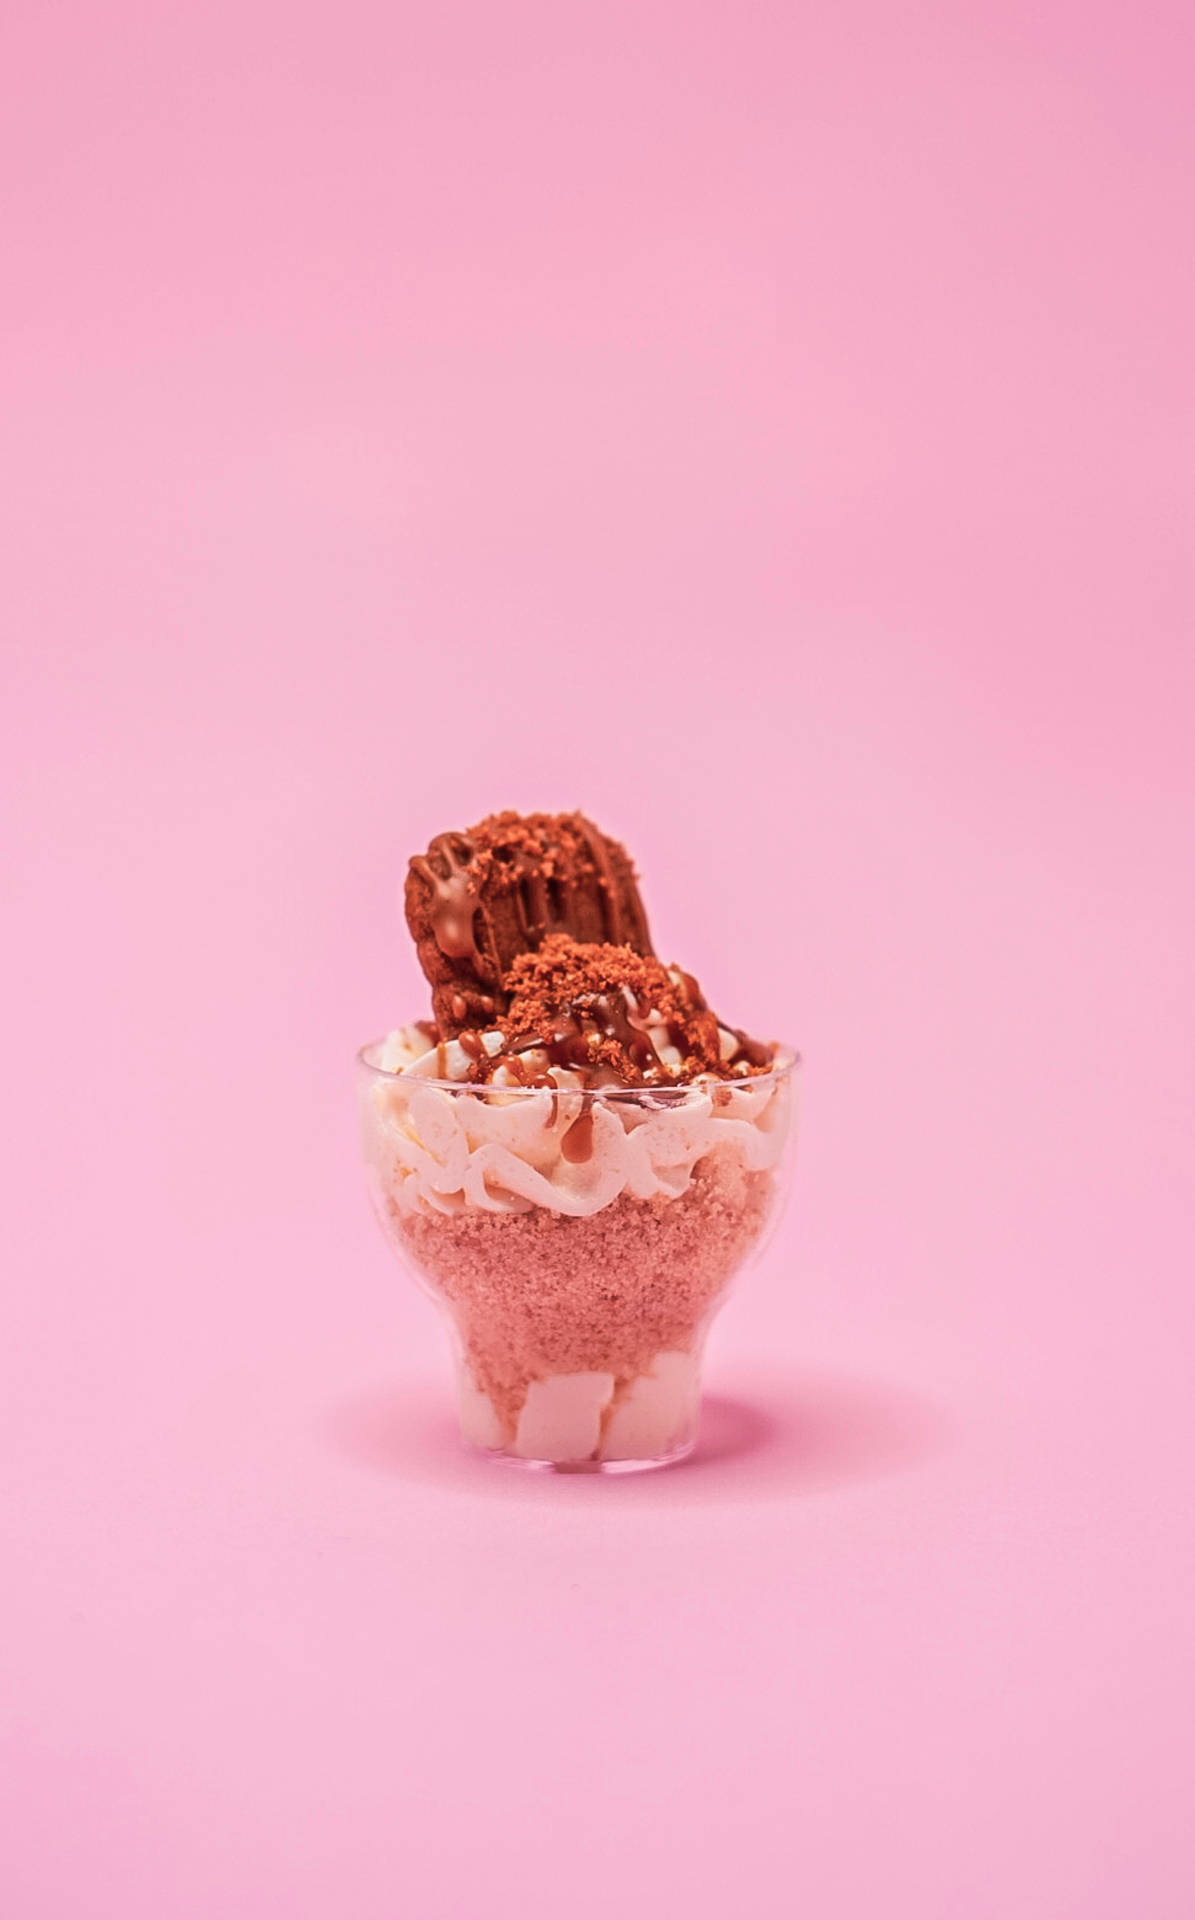 Ice Cream 3210X5158 Wallpaper and Background Image